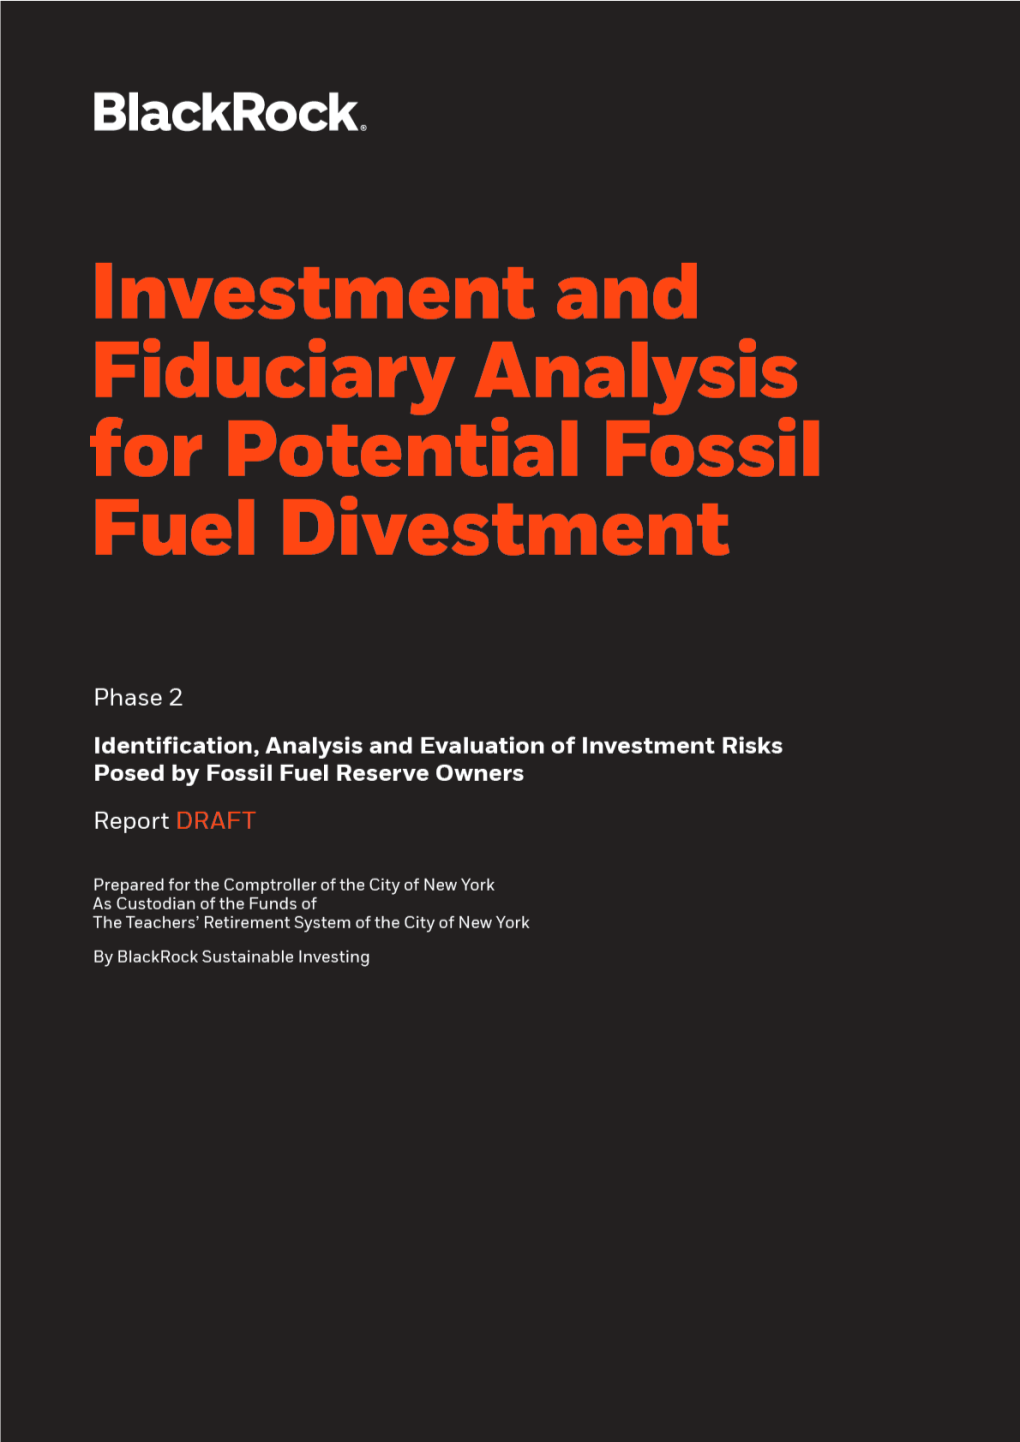 Investment and Fiduciary Analysis for Potential Fossil Fuel Divestment: Phase 2 DRAFT Blackrock Sustainable Investing